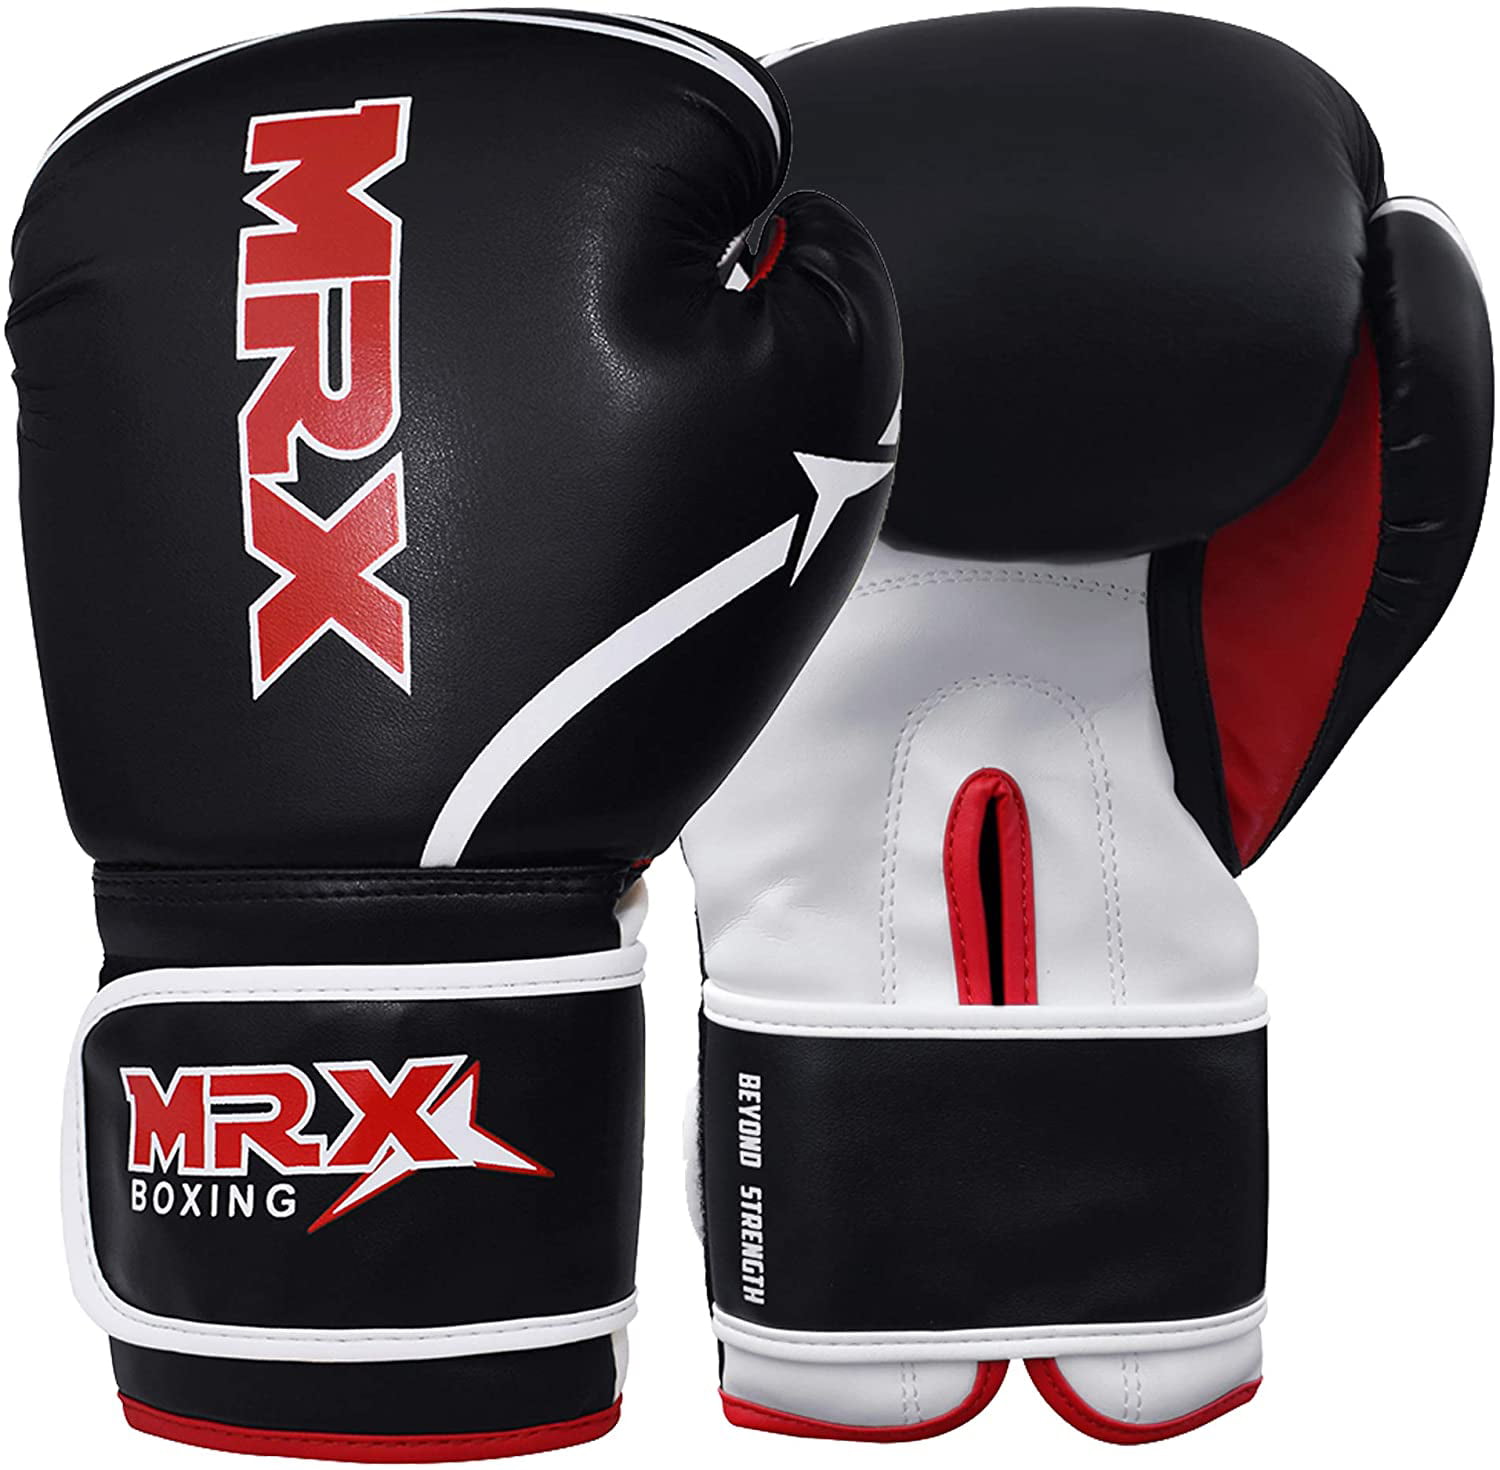 *FREE* Pro Box Pro-Spar Leather Sparring Gloves Red Boxing Kickboxing Training 